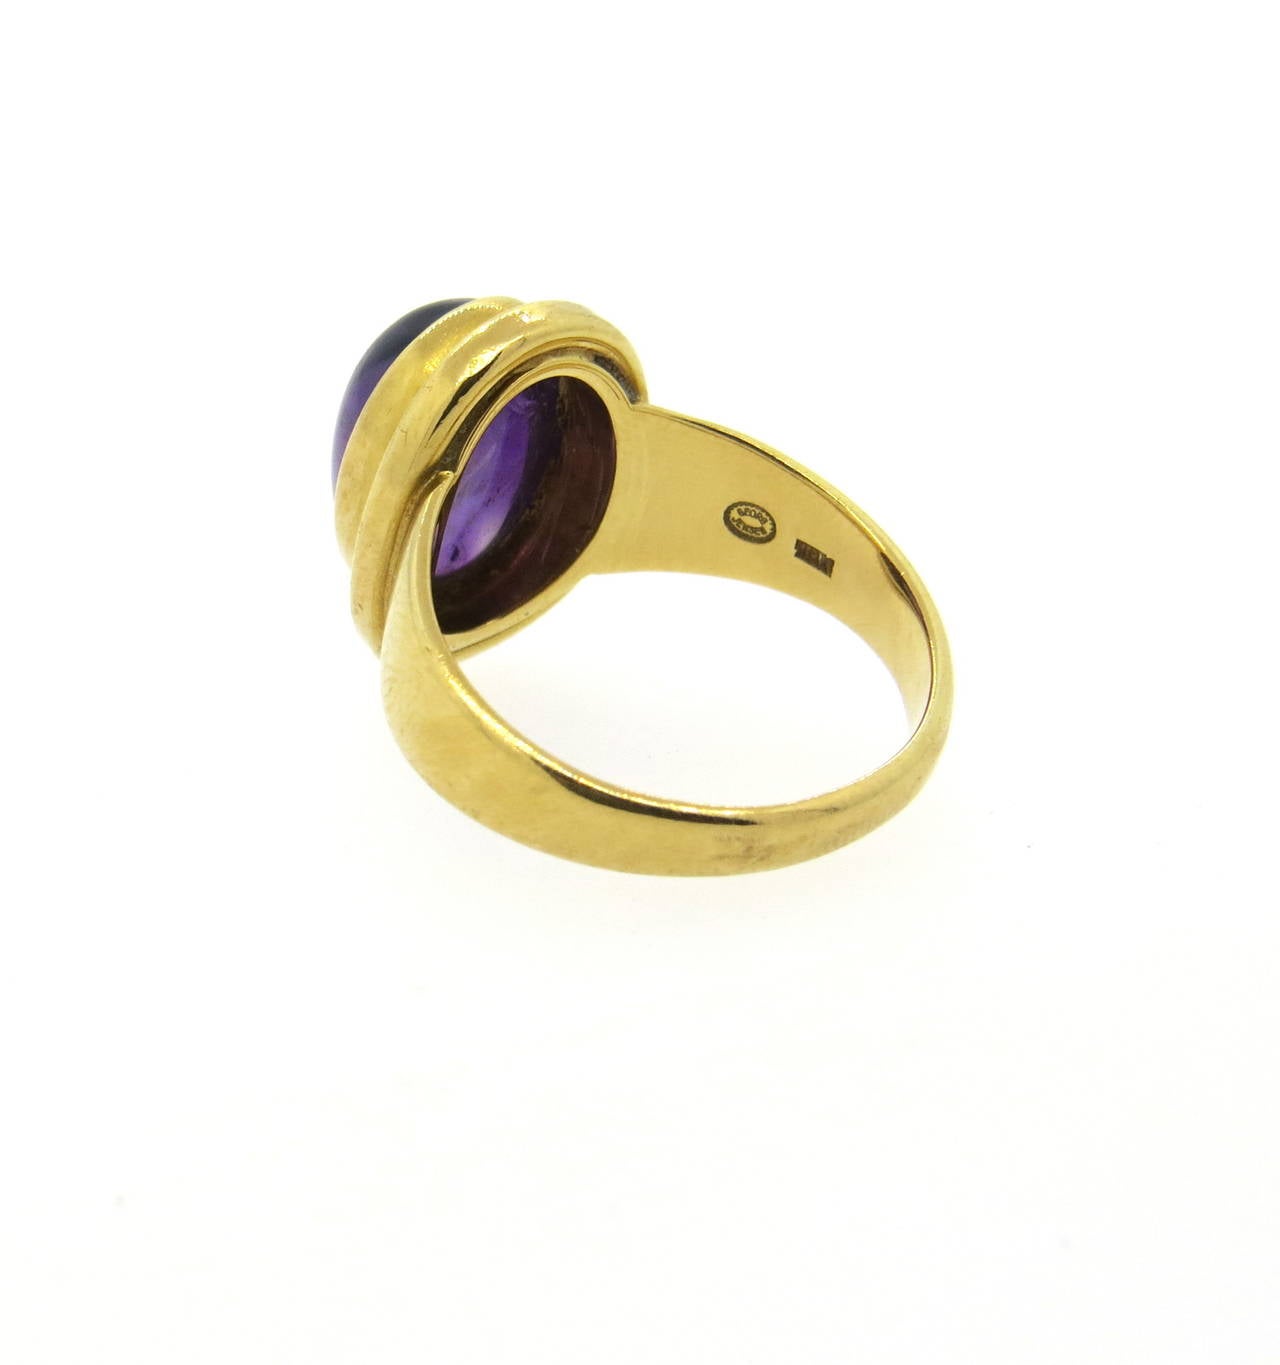 An 18k yellow gold ring set with an amethyst cabochon weighing approximately 5 carats.  Crafted by Georg Jensen, the ring is a size 7.5 and weighs 8.3 grams. Marked Georg Jensen 1048 B 750